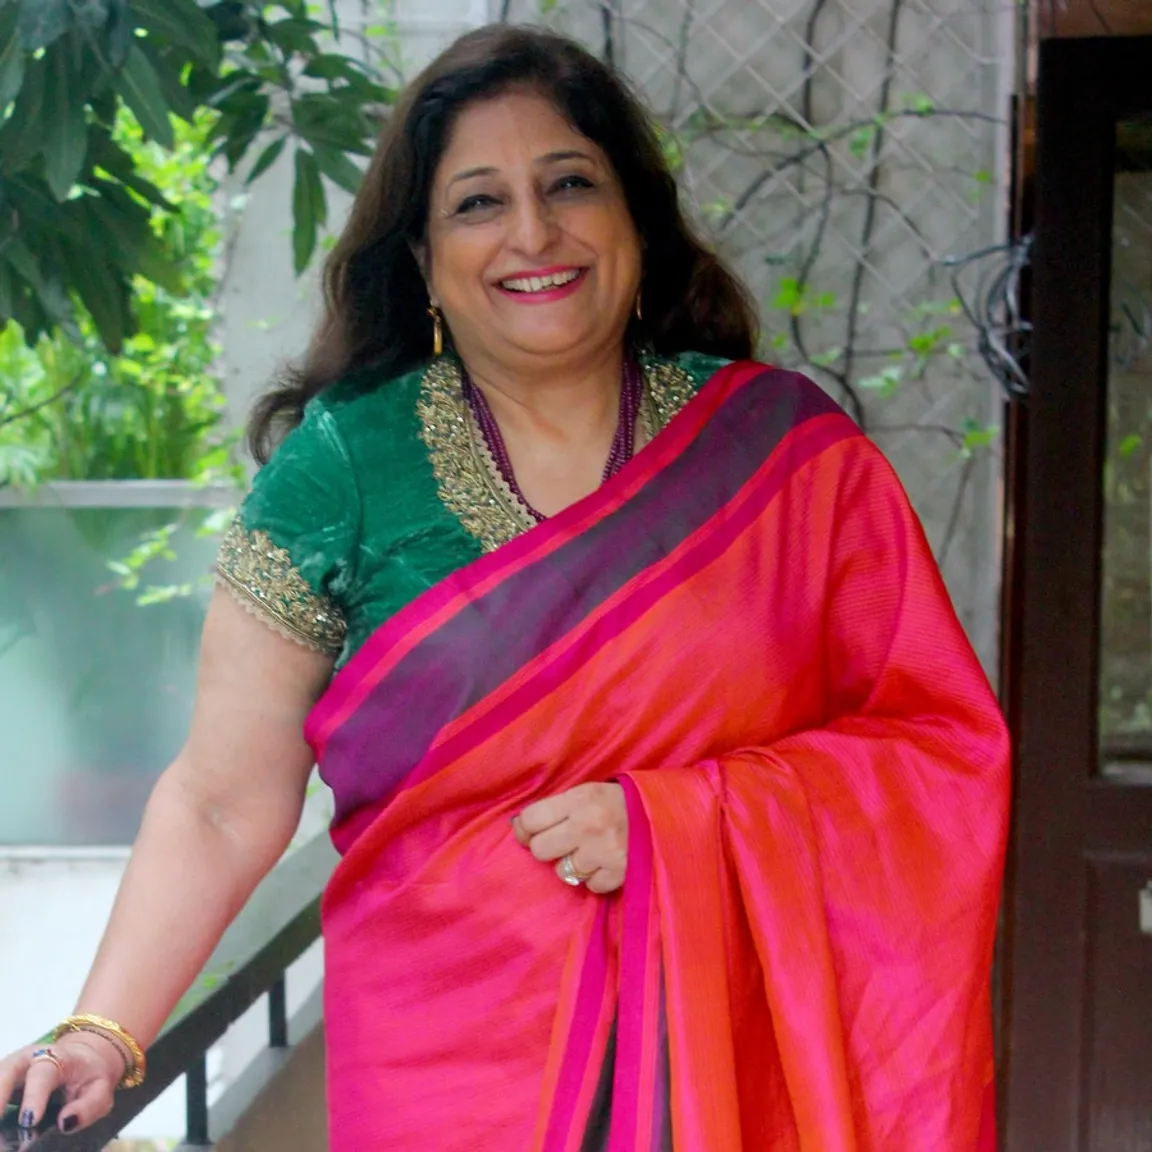 Ratna Chadha, the woman who brought cruises to India, is now gearing up to get busy retiring